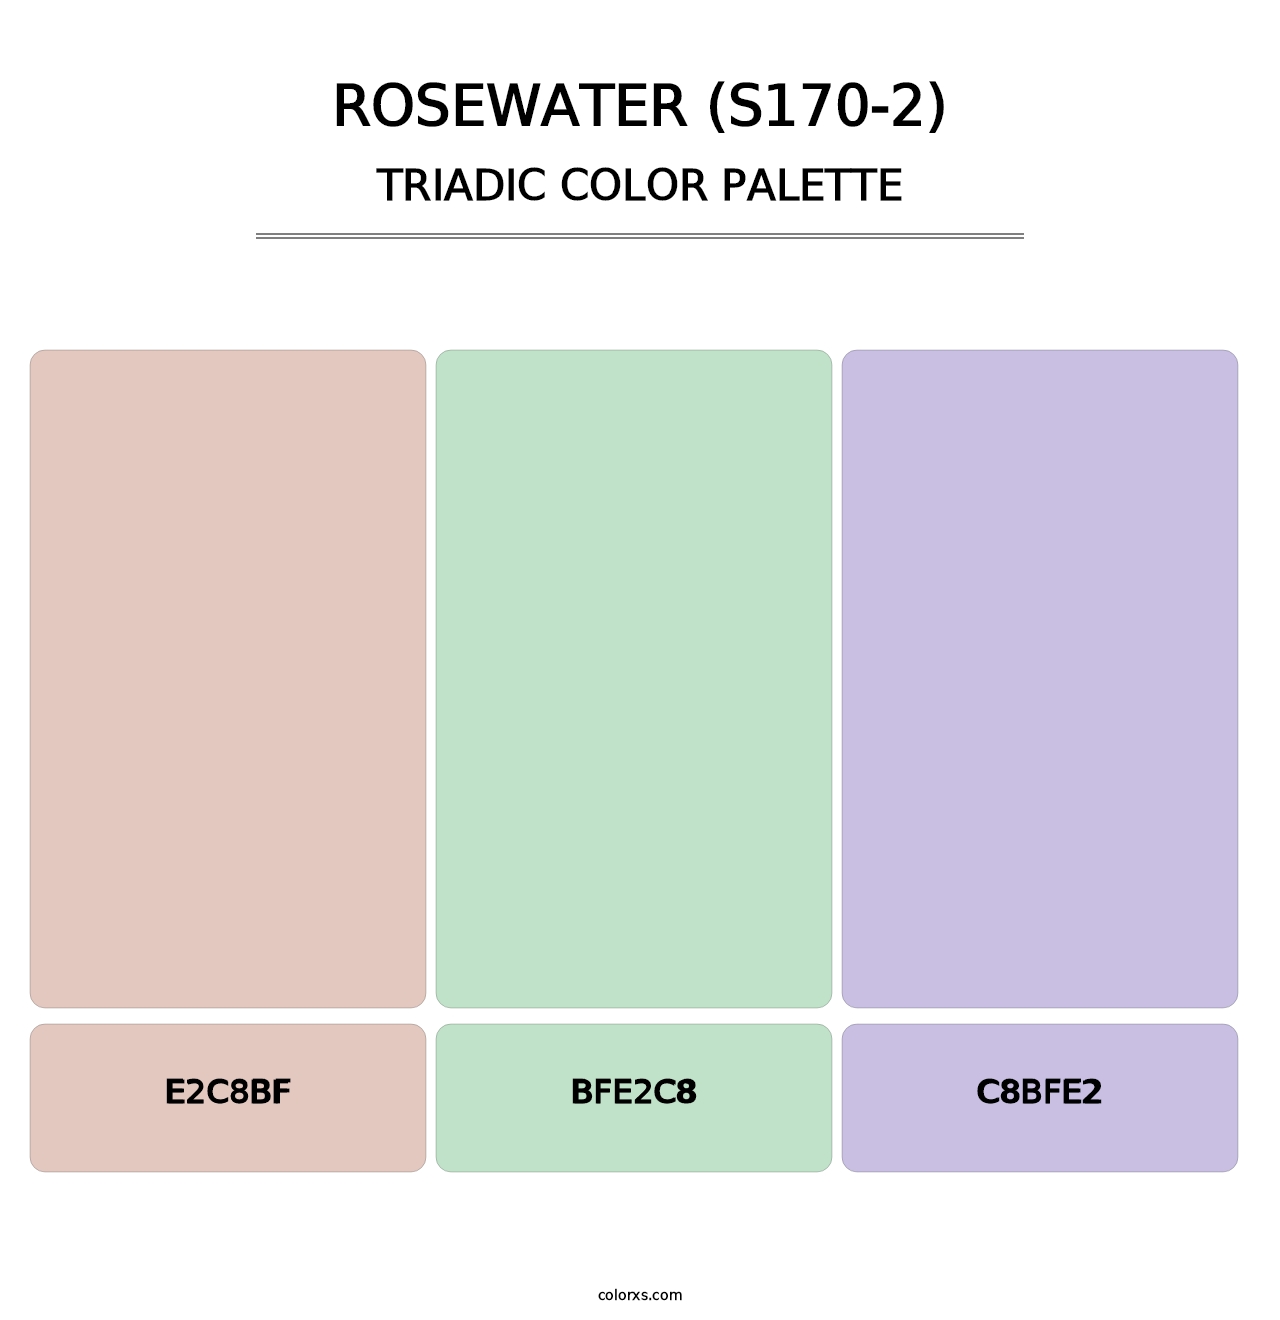 Rosewater (S170-2) - Triadic Color Palette